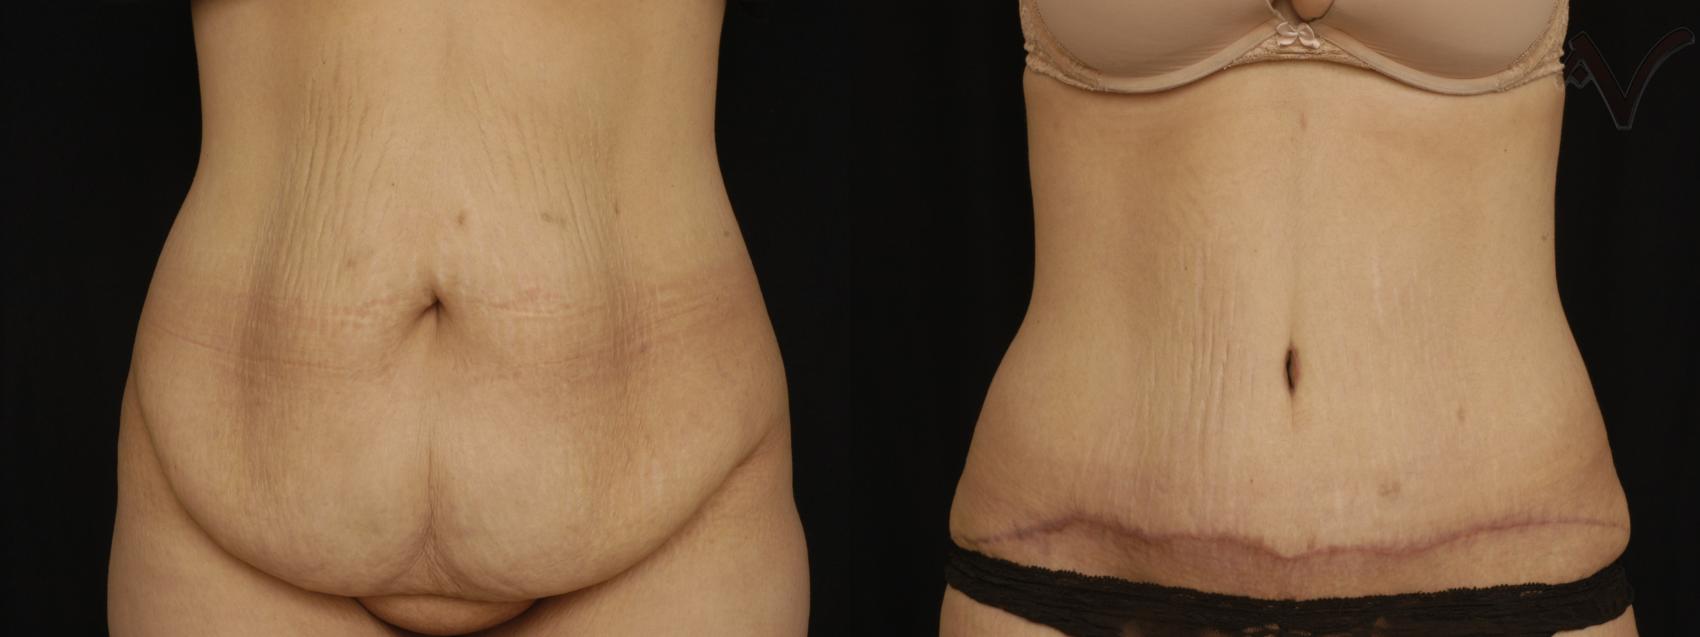 Before & After Abdominoplasty after Massive Weight Loss Case 59 Front View in Burbank, CA